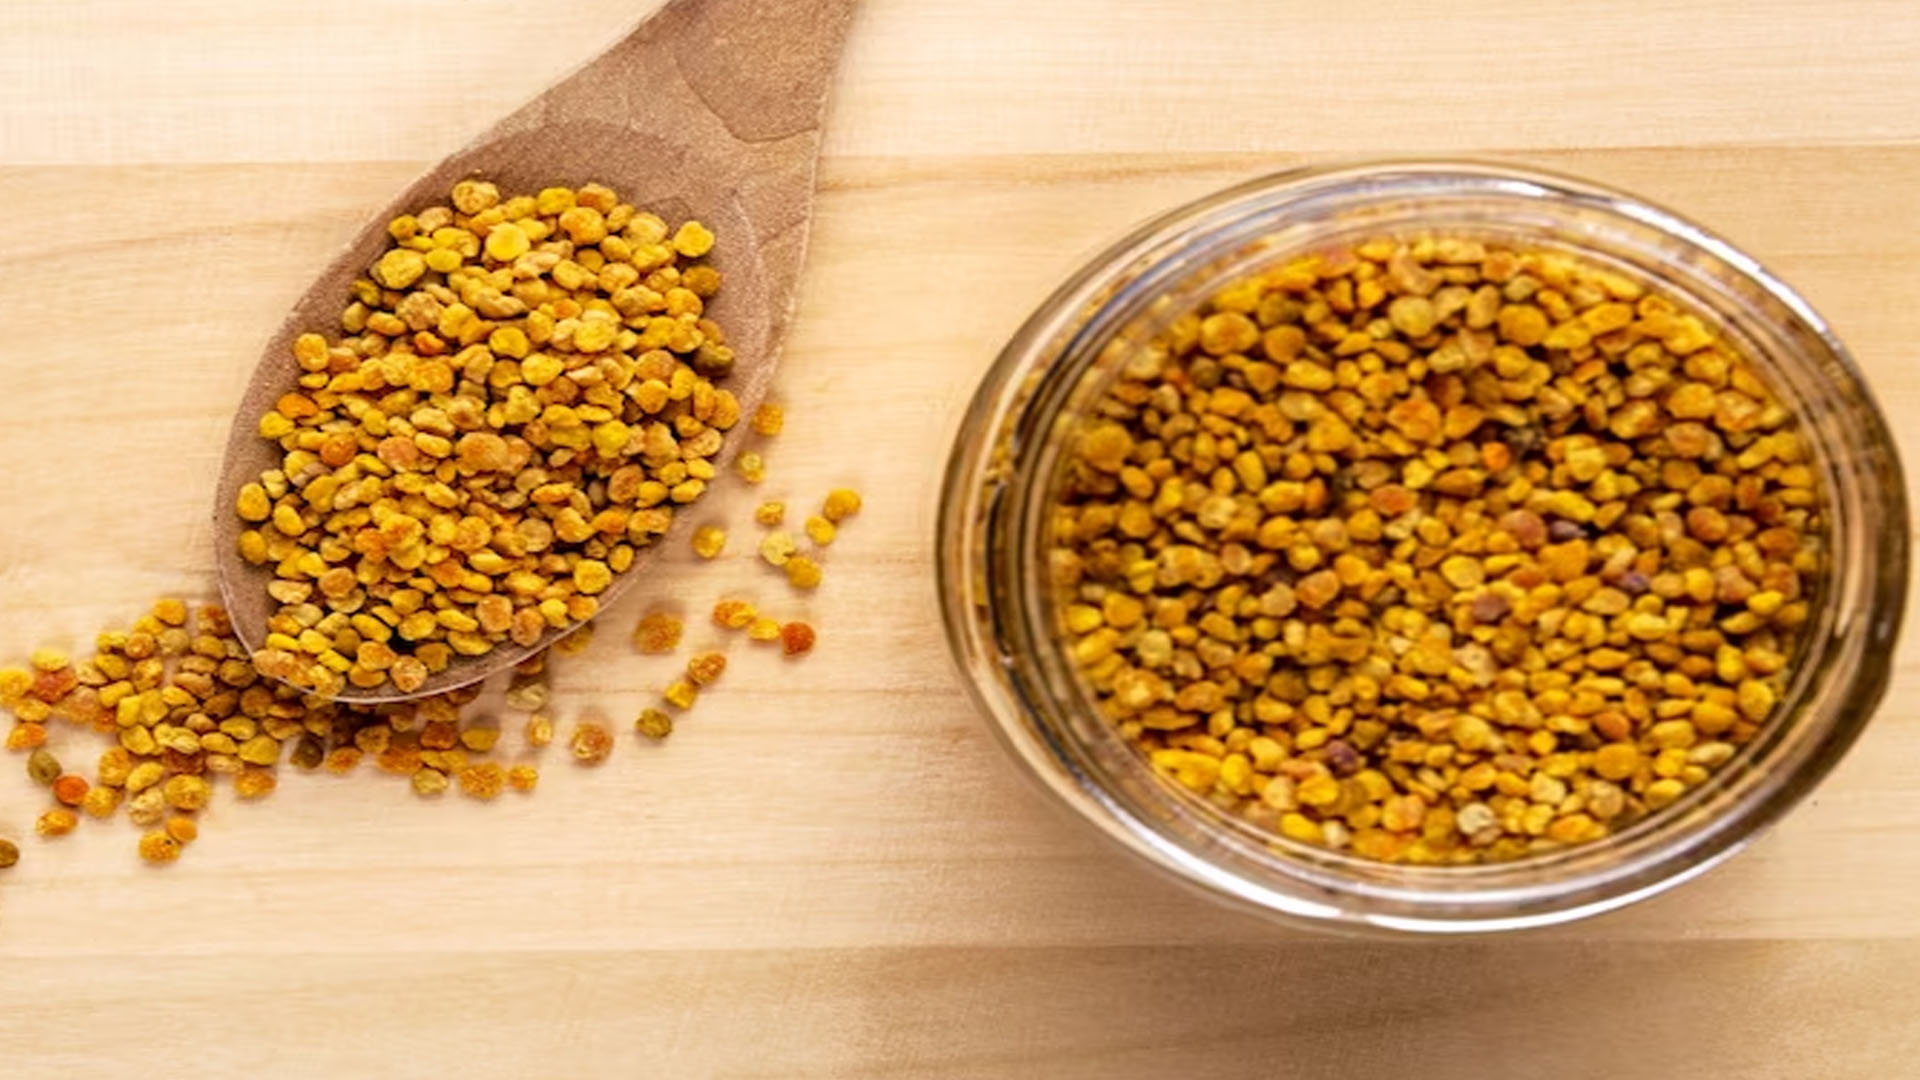 What Are The Benefits Of Fenugreek Seeds For Health?